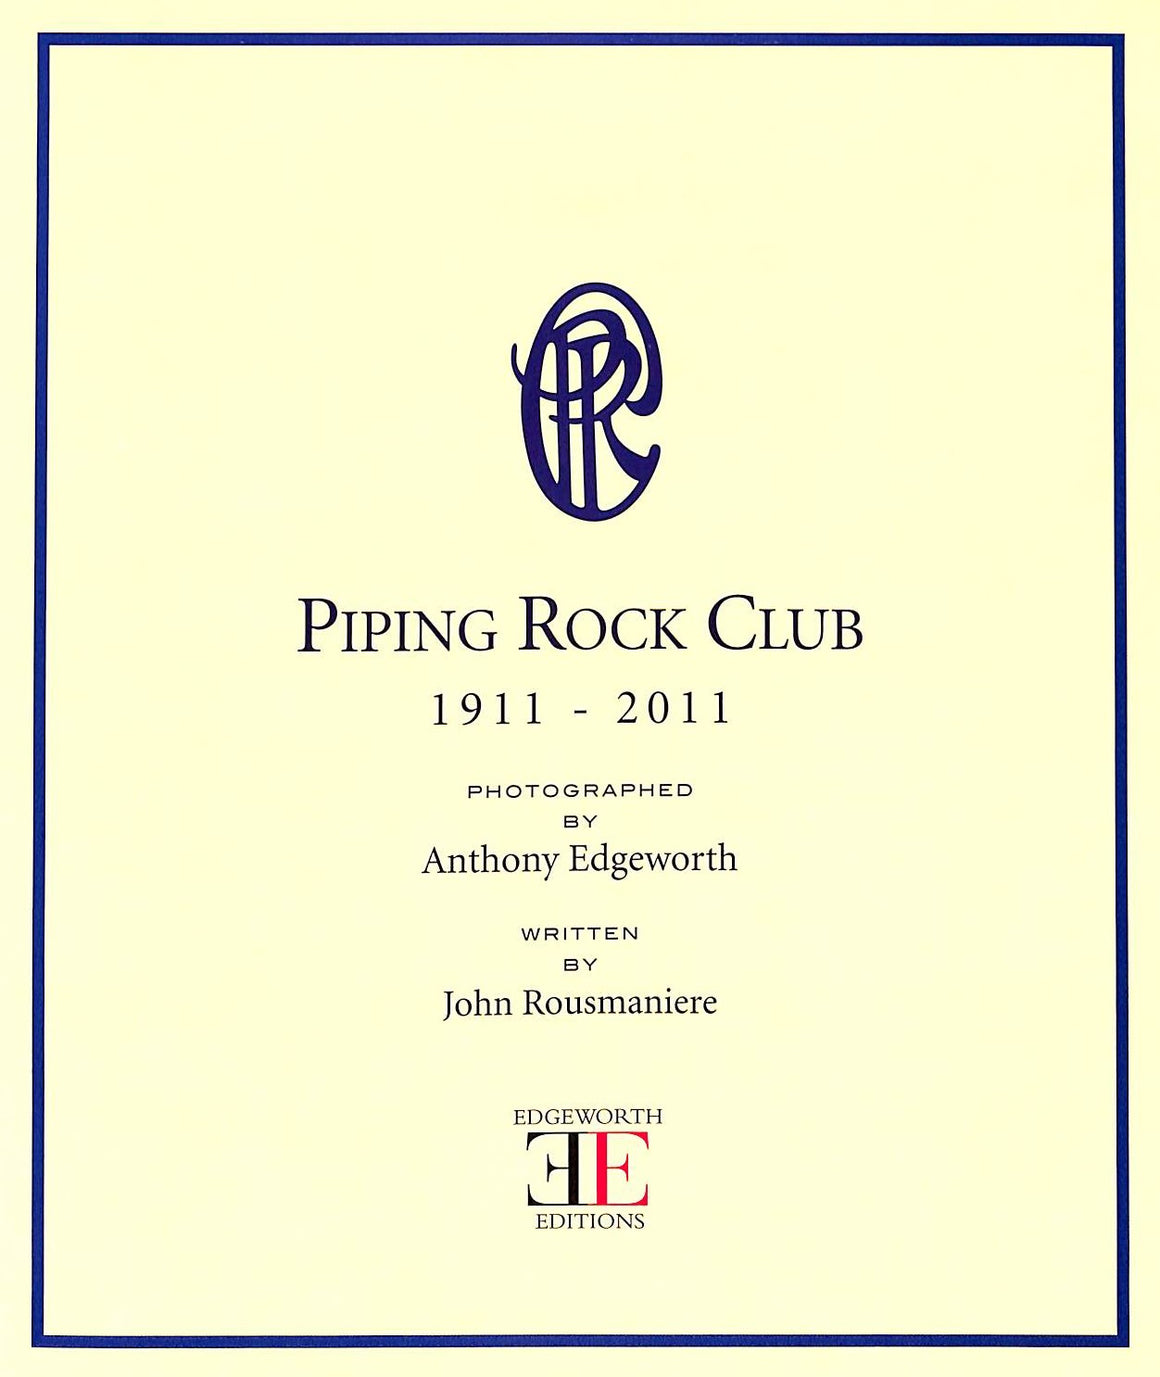 Piping Rock Club 1911-2011 by Anthony Edgeworth and John Rousmaniere (SOLD)